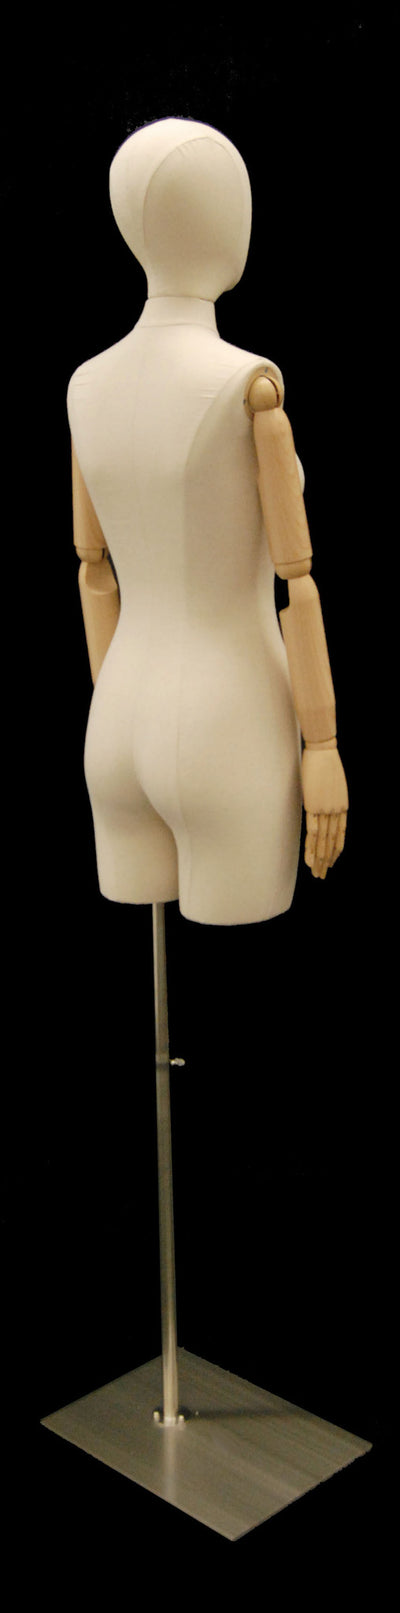 Female Half-Leg Dress Form with Bendable Arms: Natural Linen